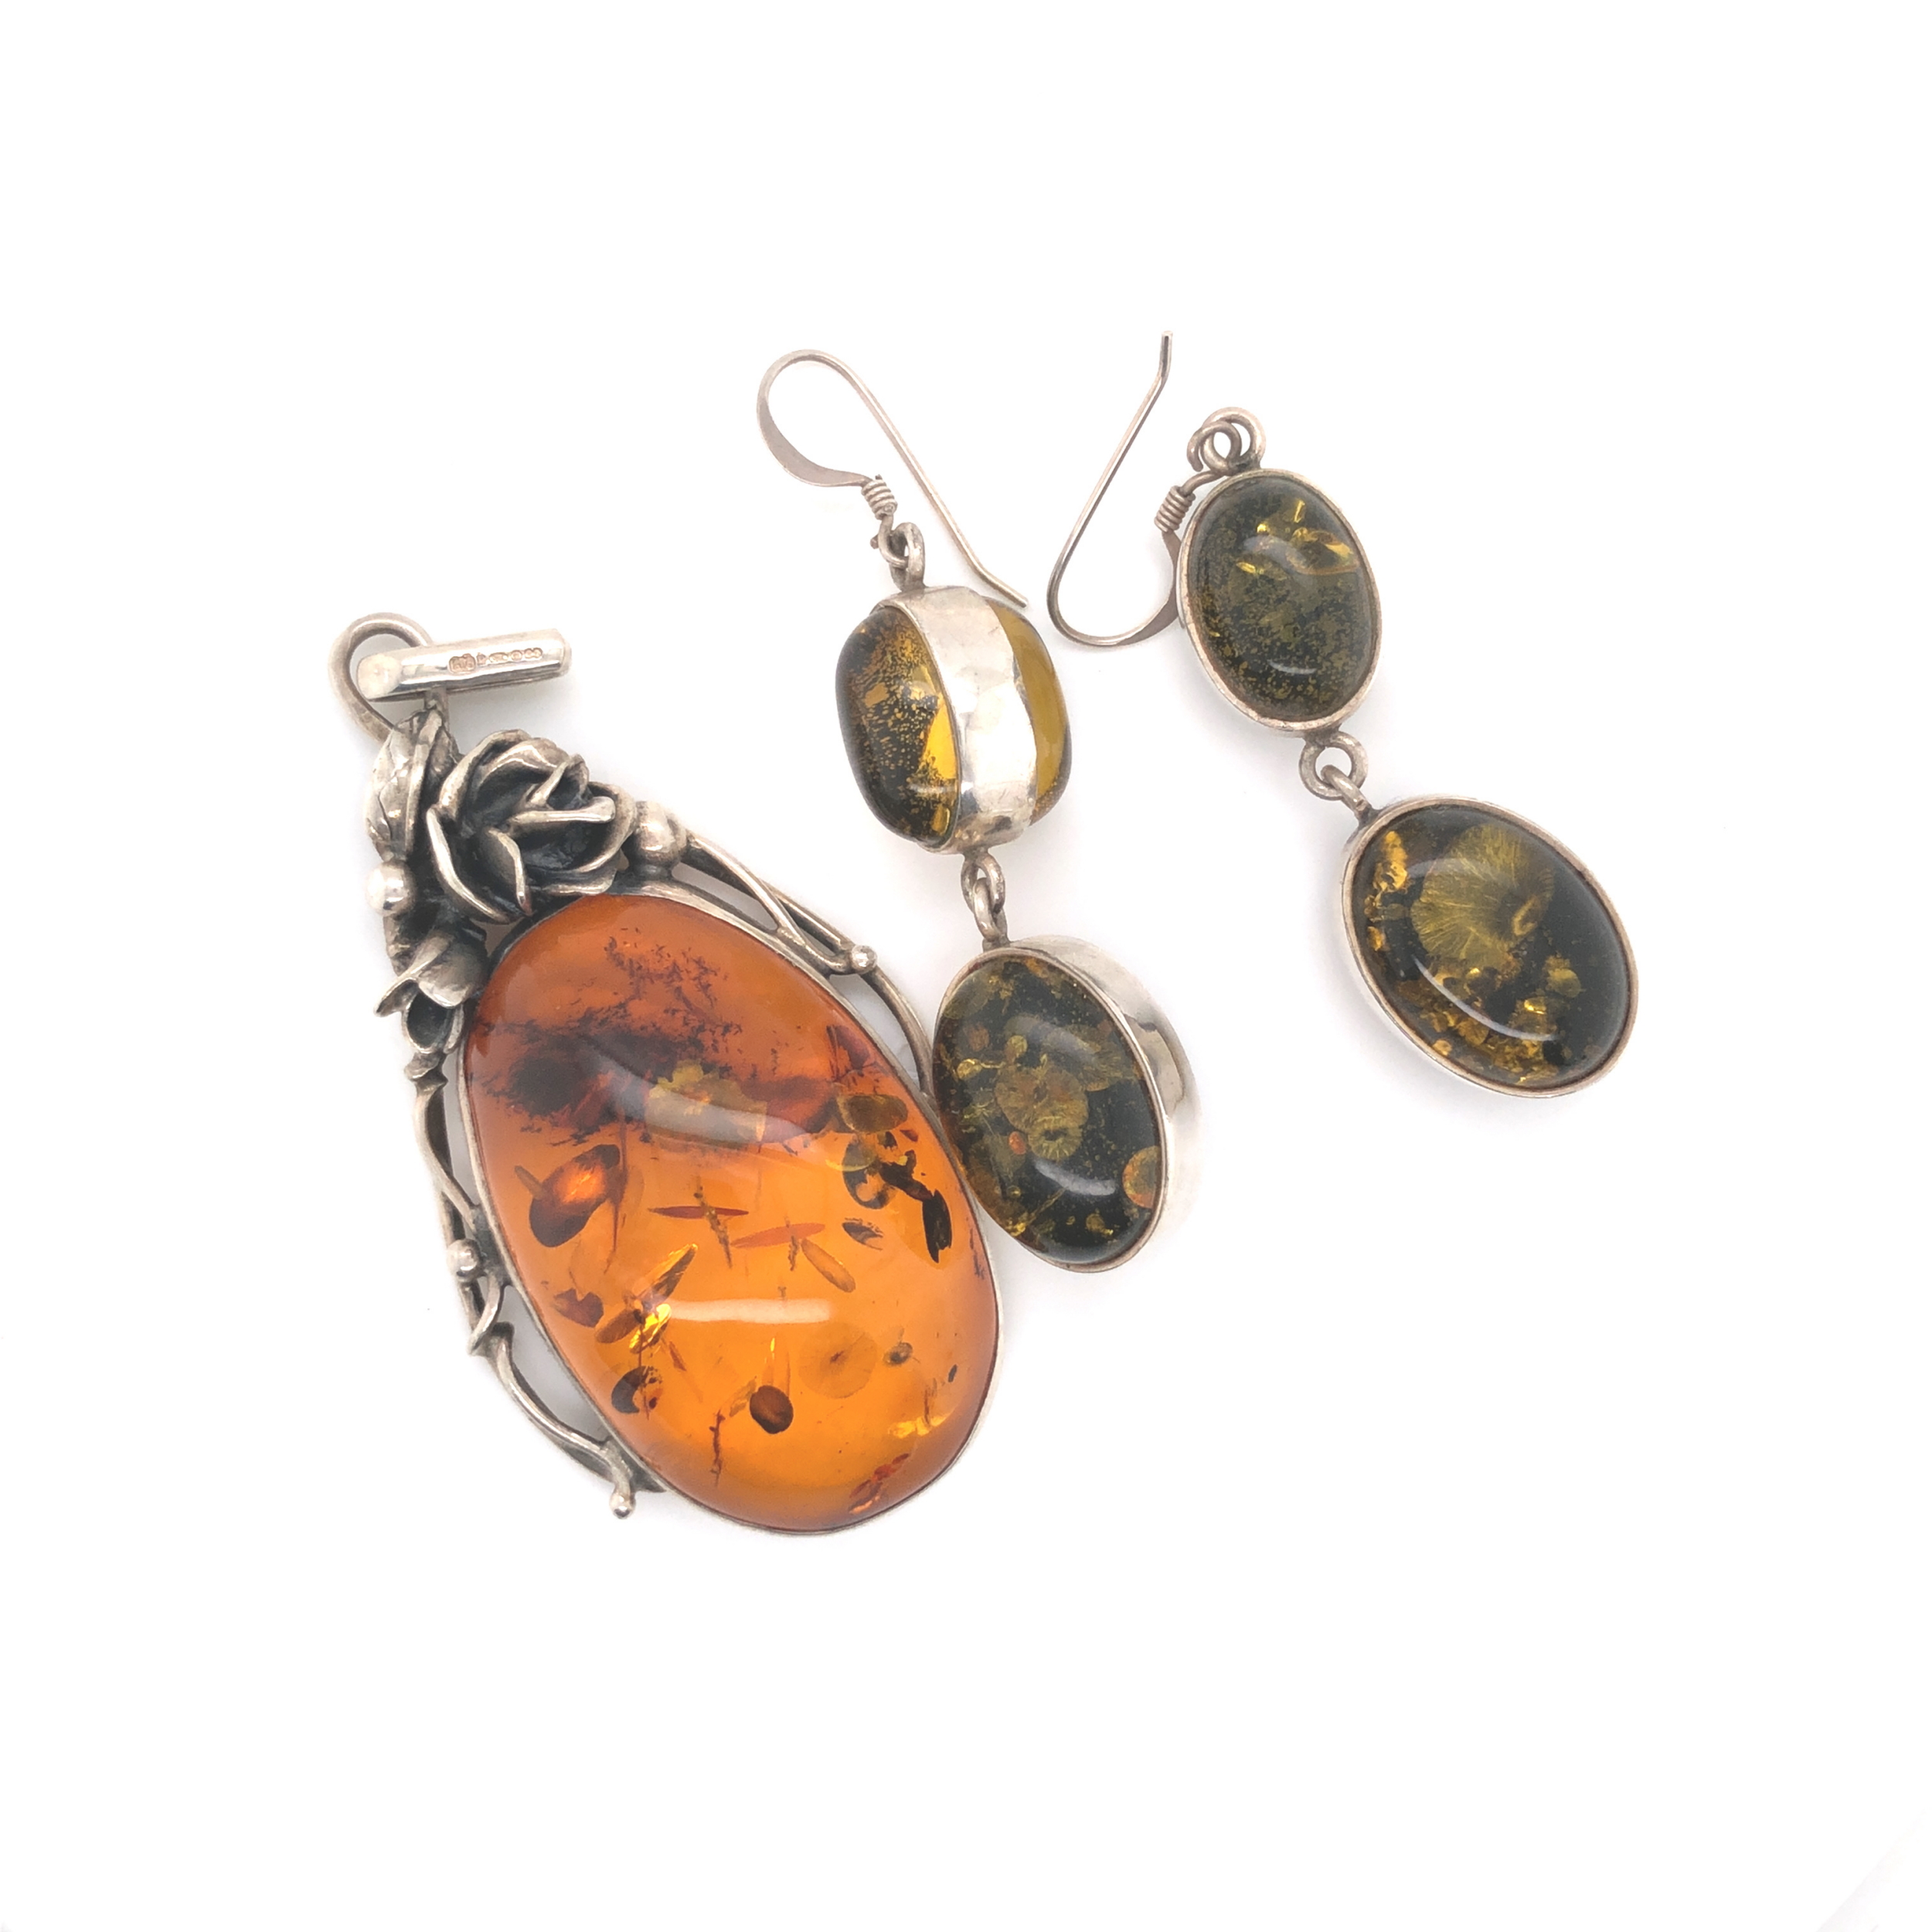 A HALLMARKED SILVER AND AMBER FOLIATE DESIGN DROP PENDANT. LENGTH INCLUDING BAIL 7cms. WEIGHT 17. - Image 2 of 2